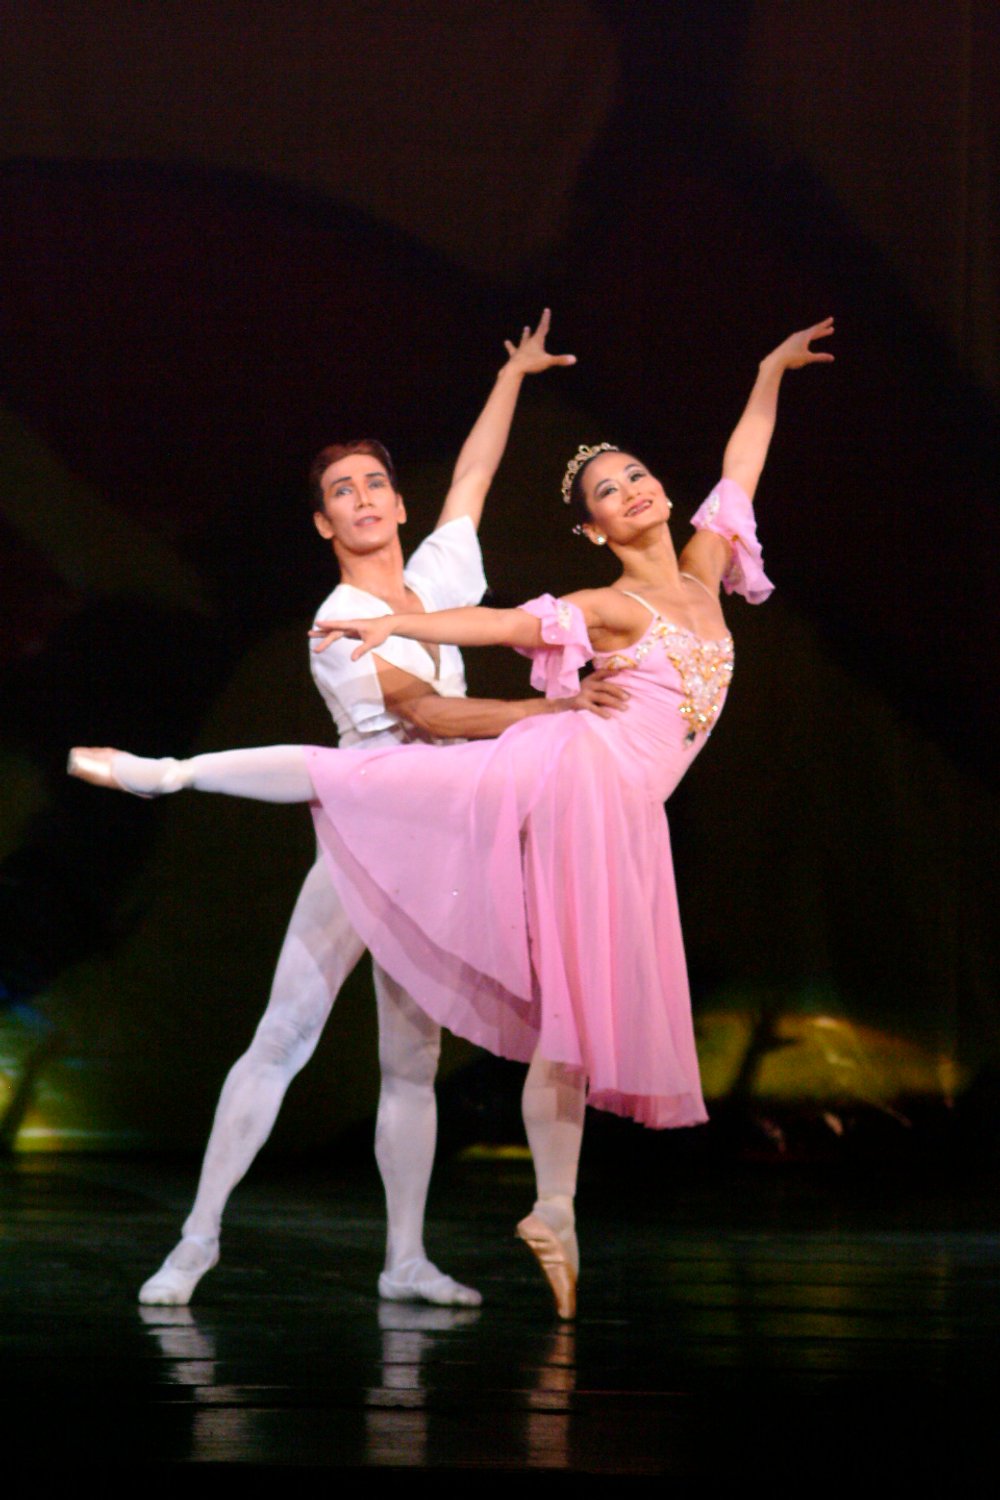    As the lead ballerina in Tony Fabella’s  Dancing to Verdi , Lisa Macuja-Elizalde is a vision in pink, as partnered by Osias Barroso. The neoclassical piece was part of  OPM at OPB  in 2003, showcasing Original Pilipino Music and Original Pilipino 